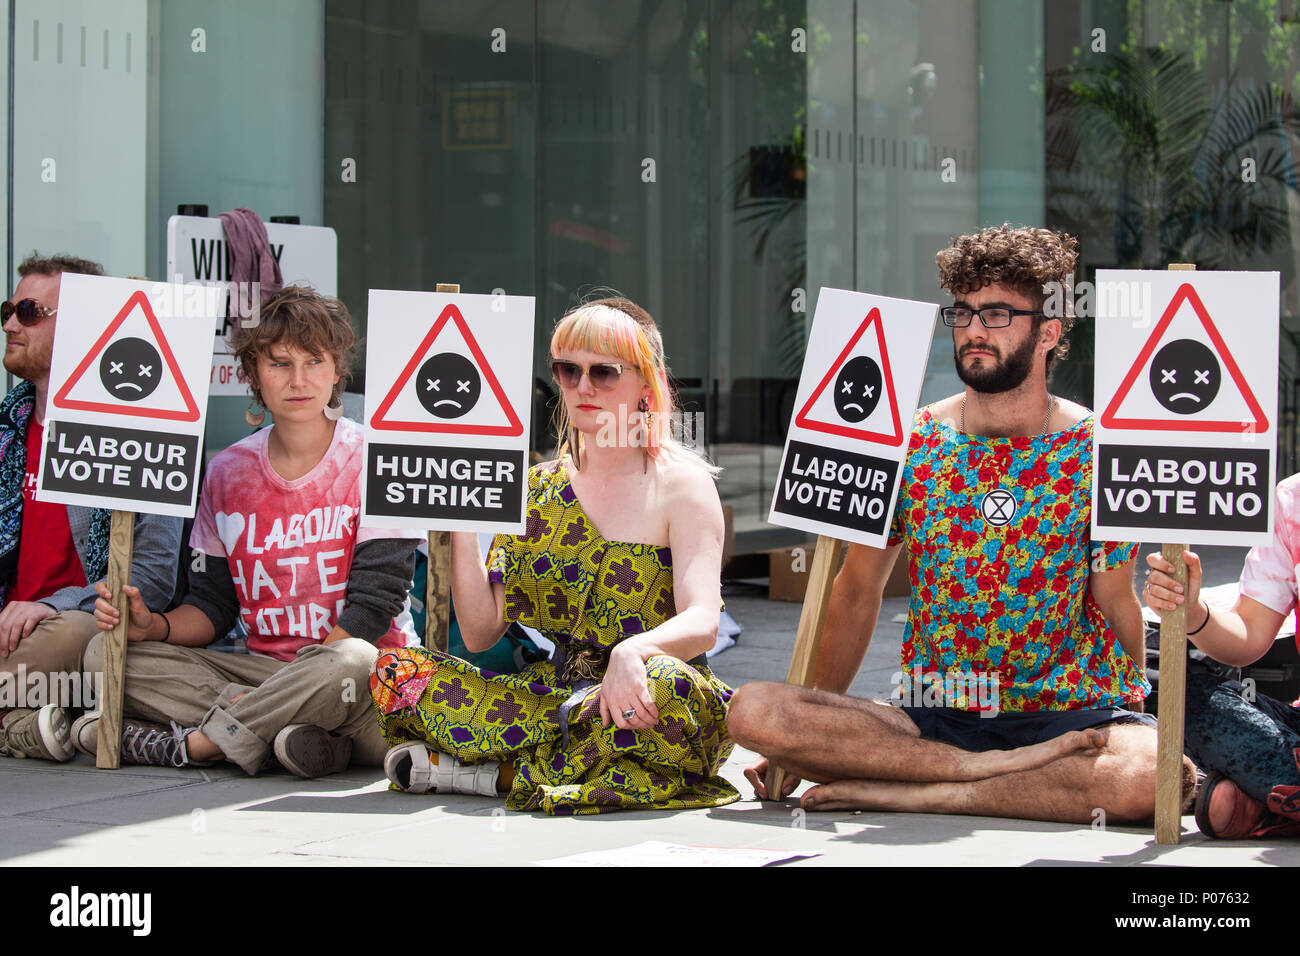 London, UK. 9th June, 2018. Climate change activists from Vote No Heathrow commence a hunger strike outside the Labour Party HQ to urge the party to commit its MPs to voting in Parliament against approval of a third runway at Heathrow Airport. Cabinet approval was given last week. Credit: Mark Kerrison/Alamy Live News Stock Photo